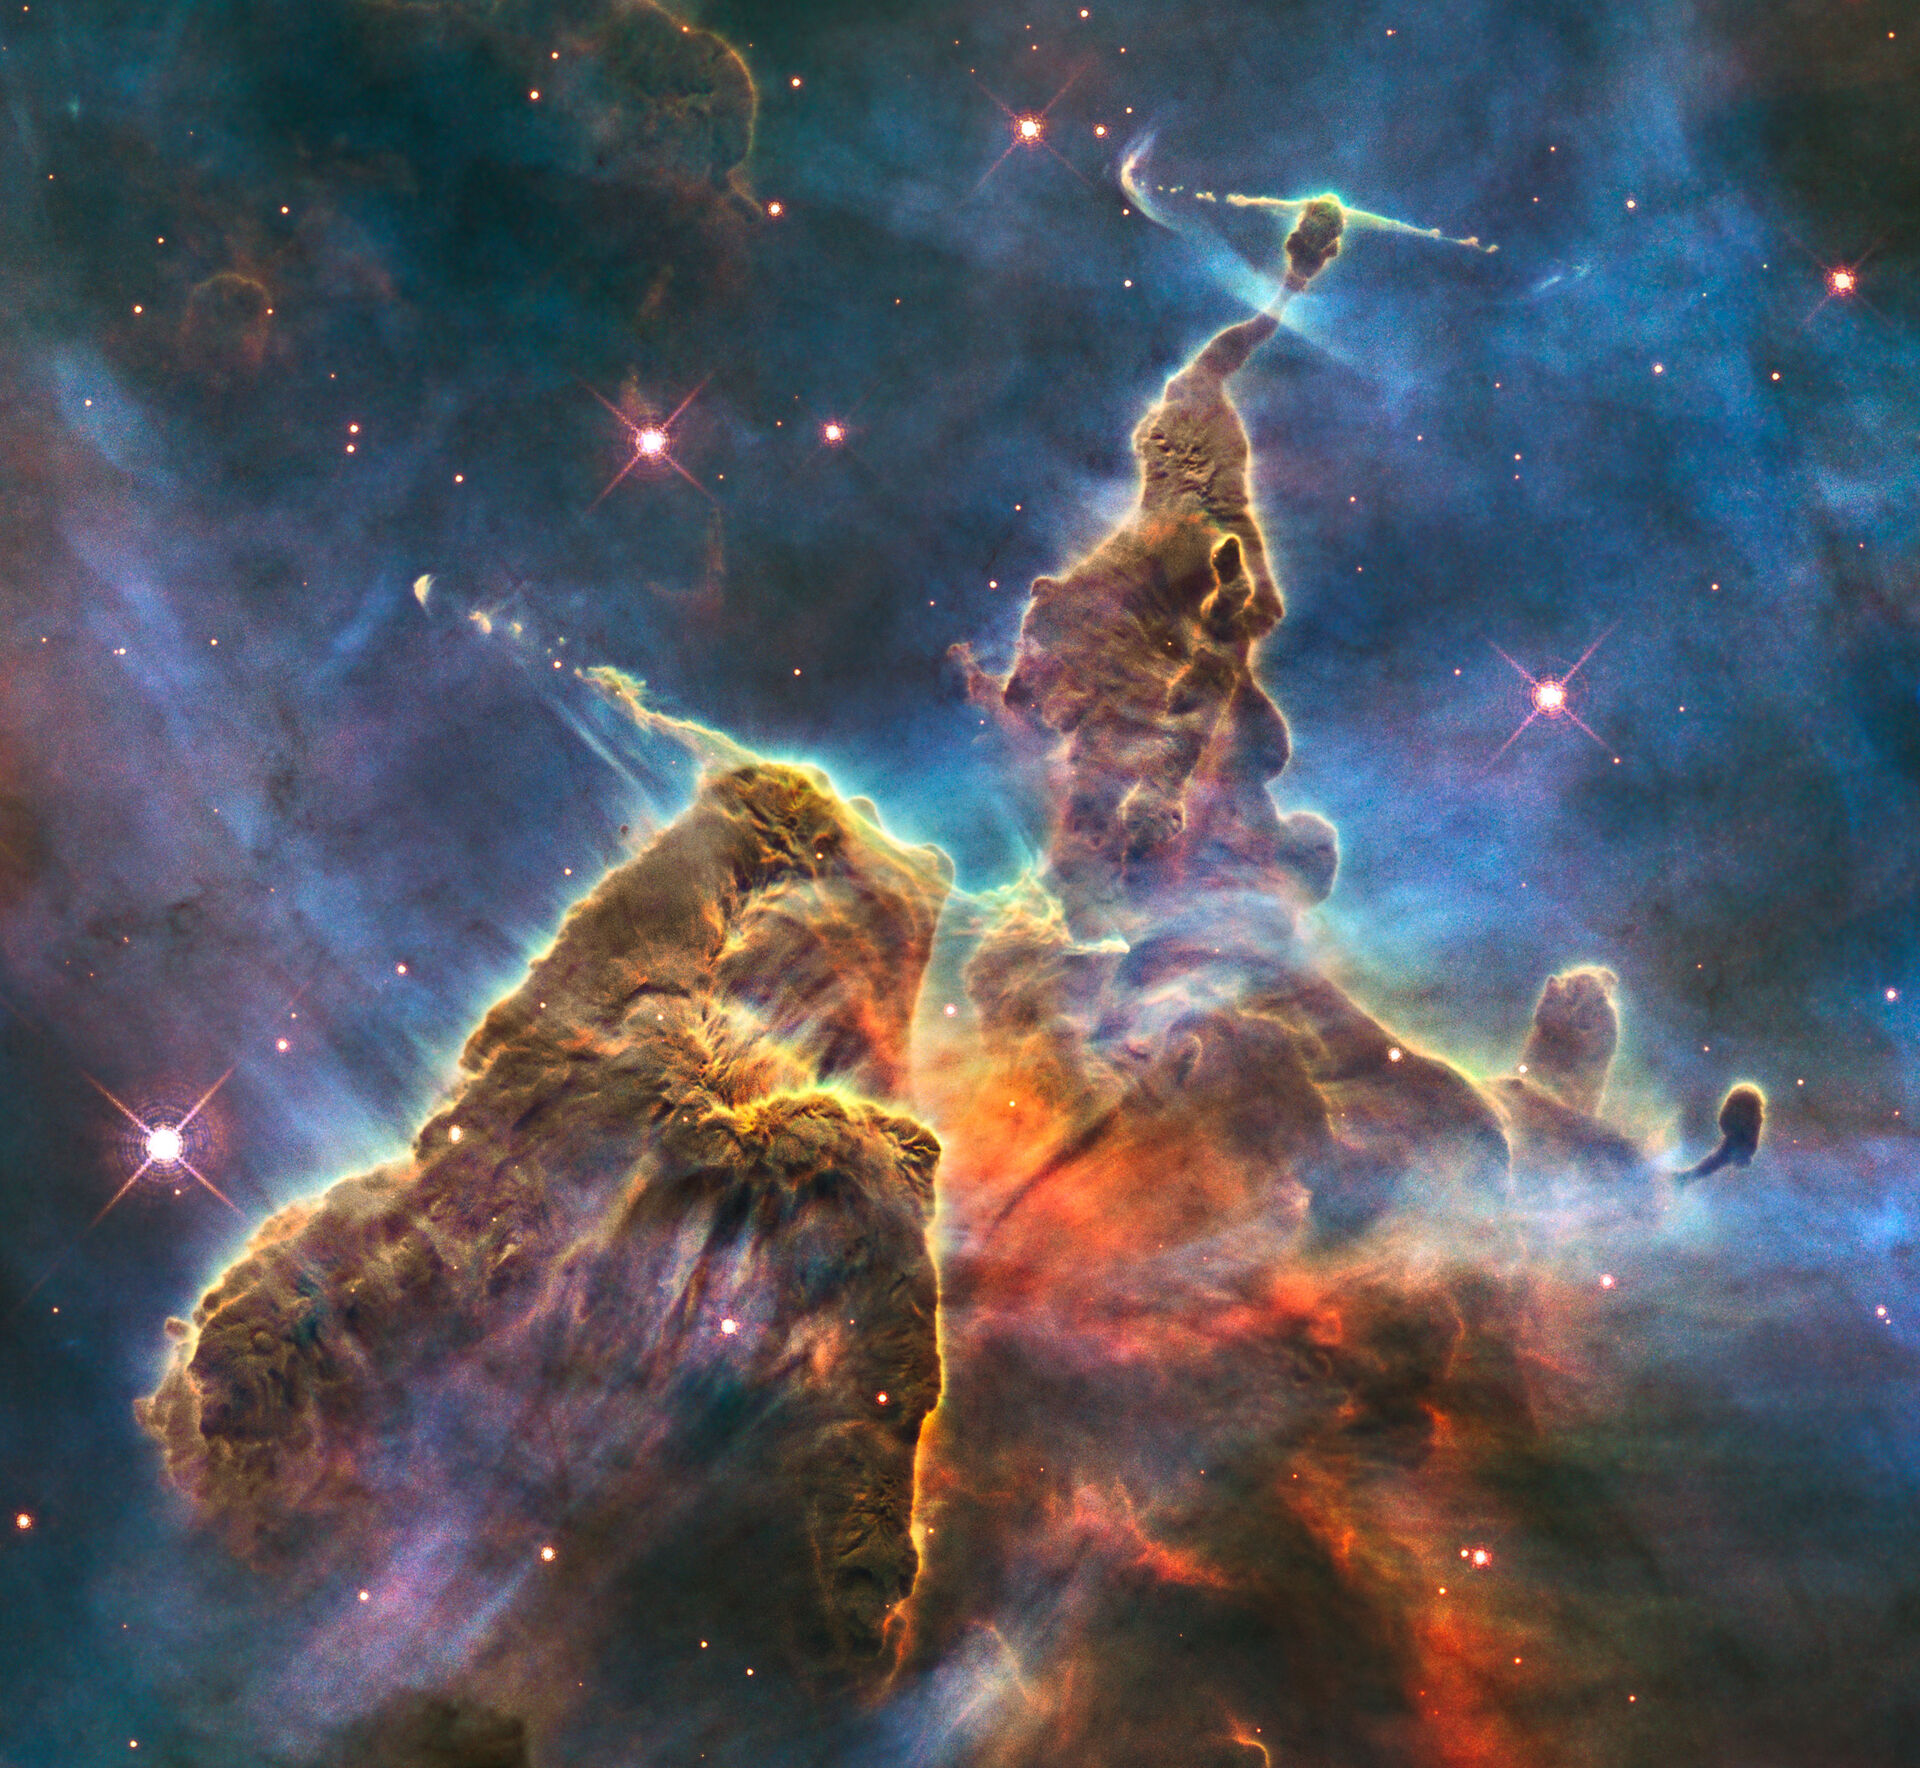 Image of a part of the star-forming region Carina Nebula.